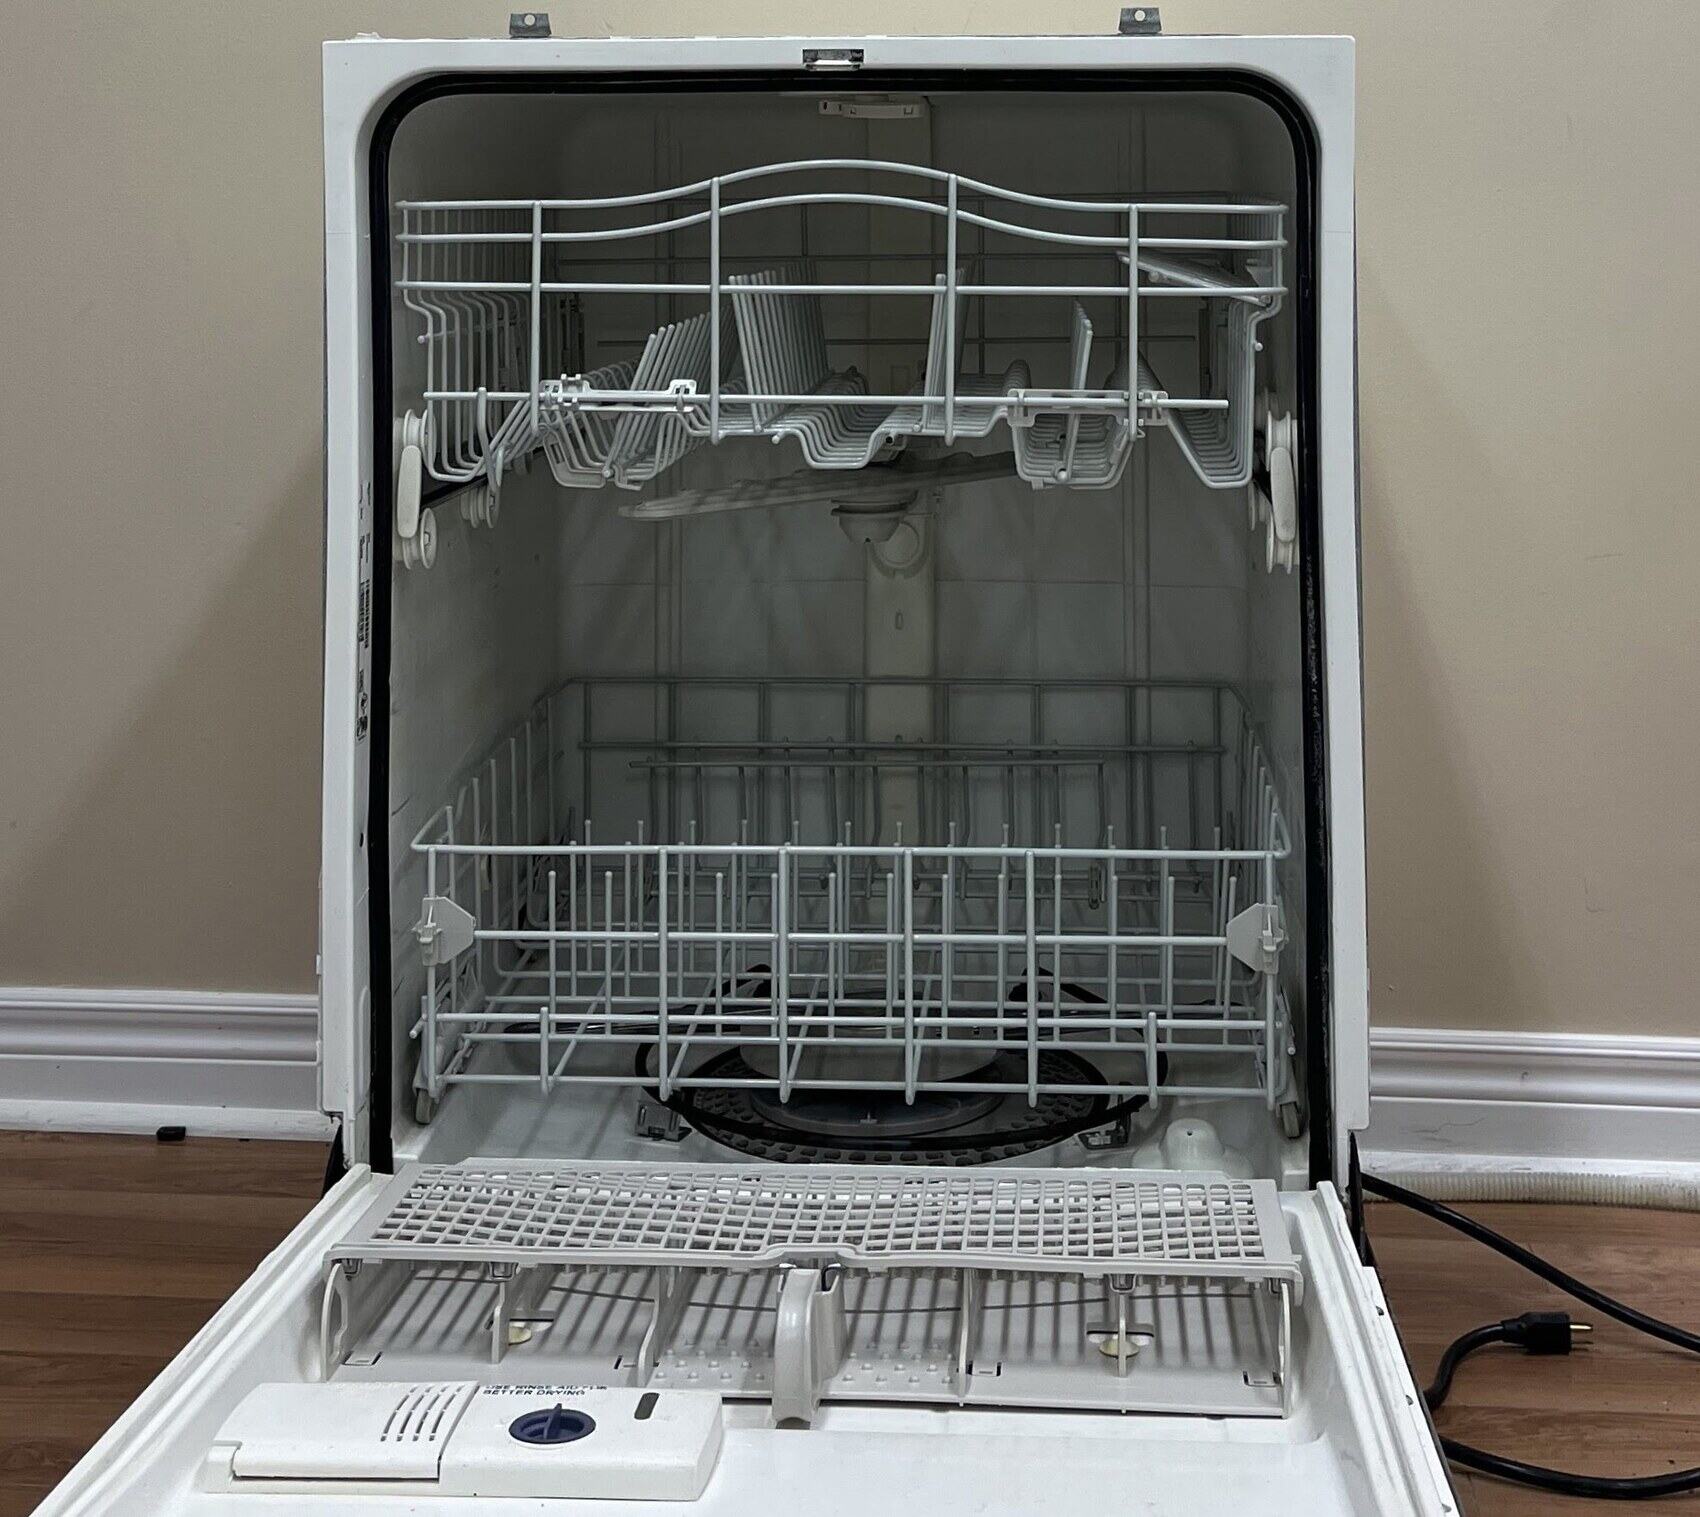 How To Fix The Error Code FB For Whirlpool Dishwasher